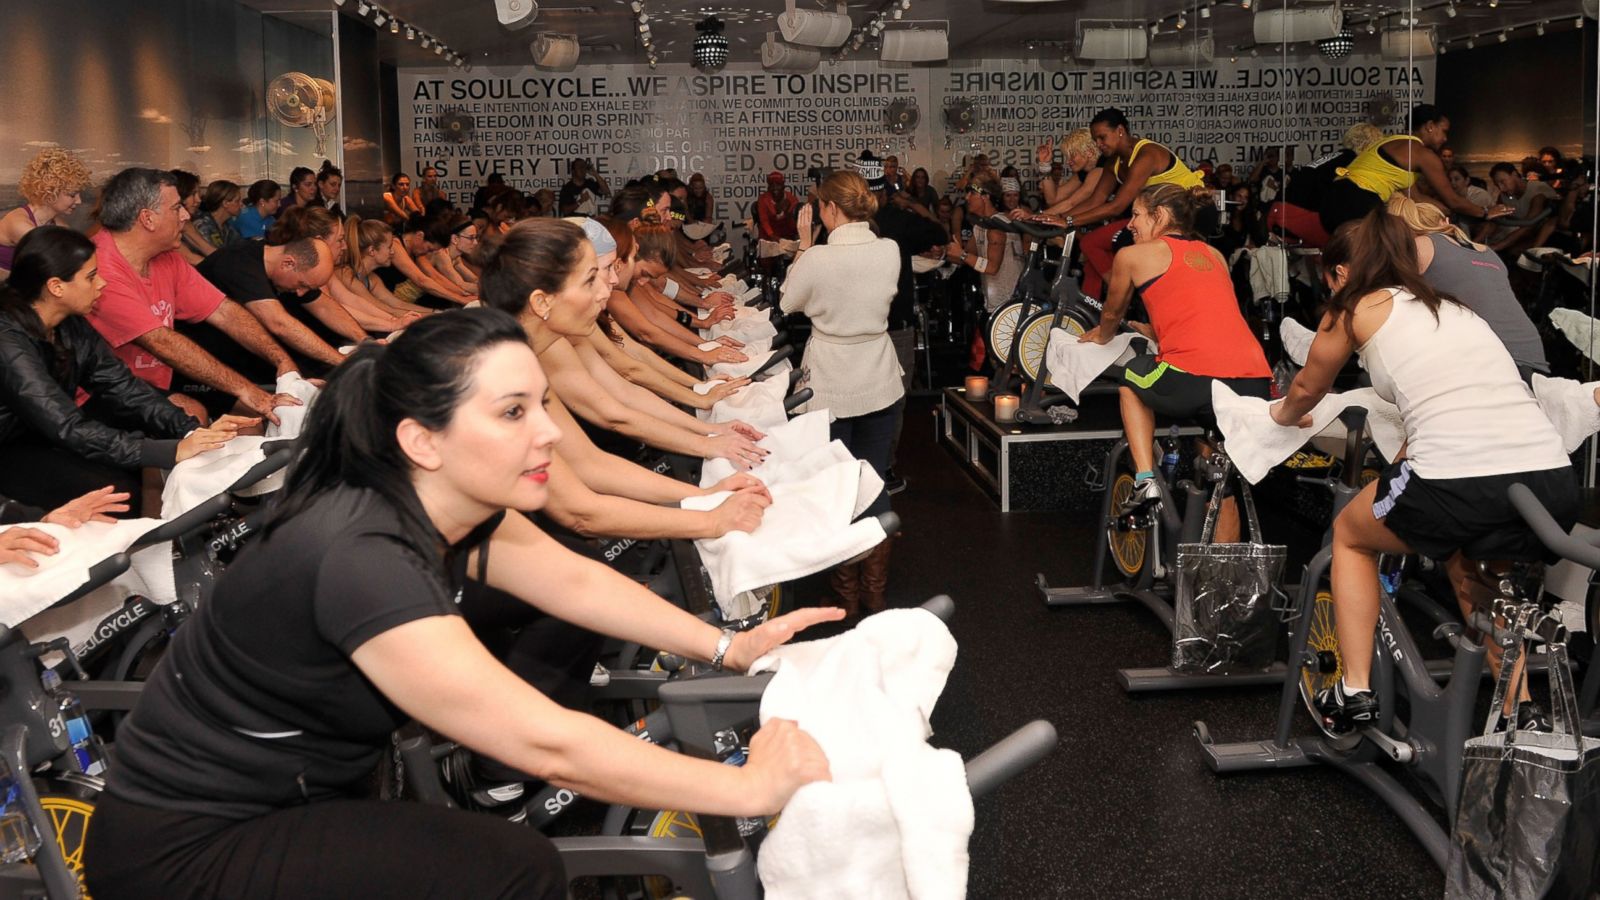 Spin This! Fitness Pro Says He Was Expelled From SoulCycle